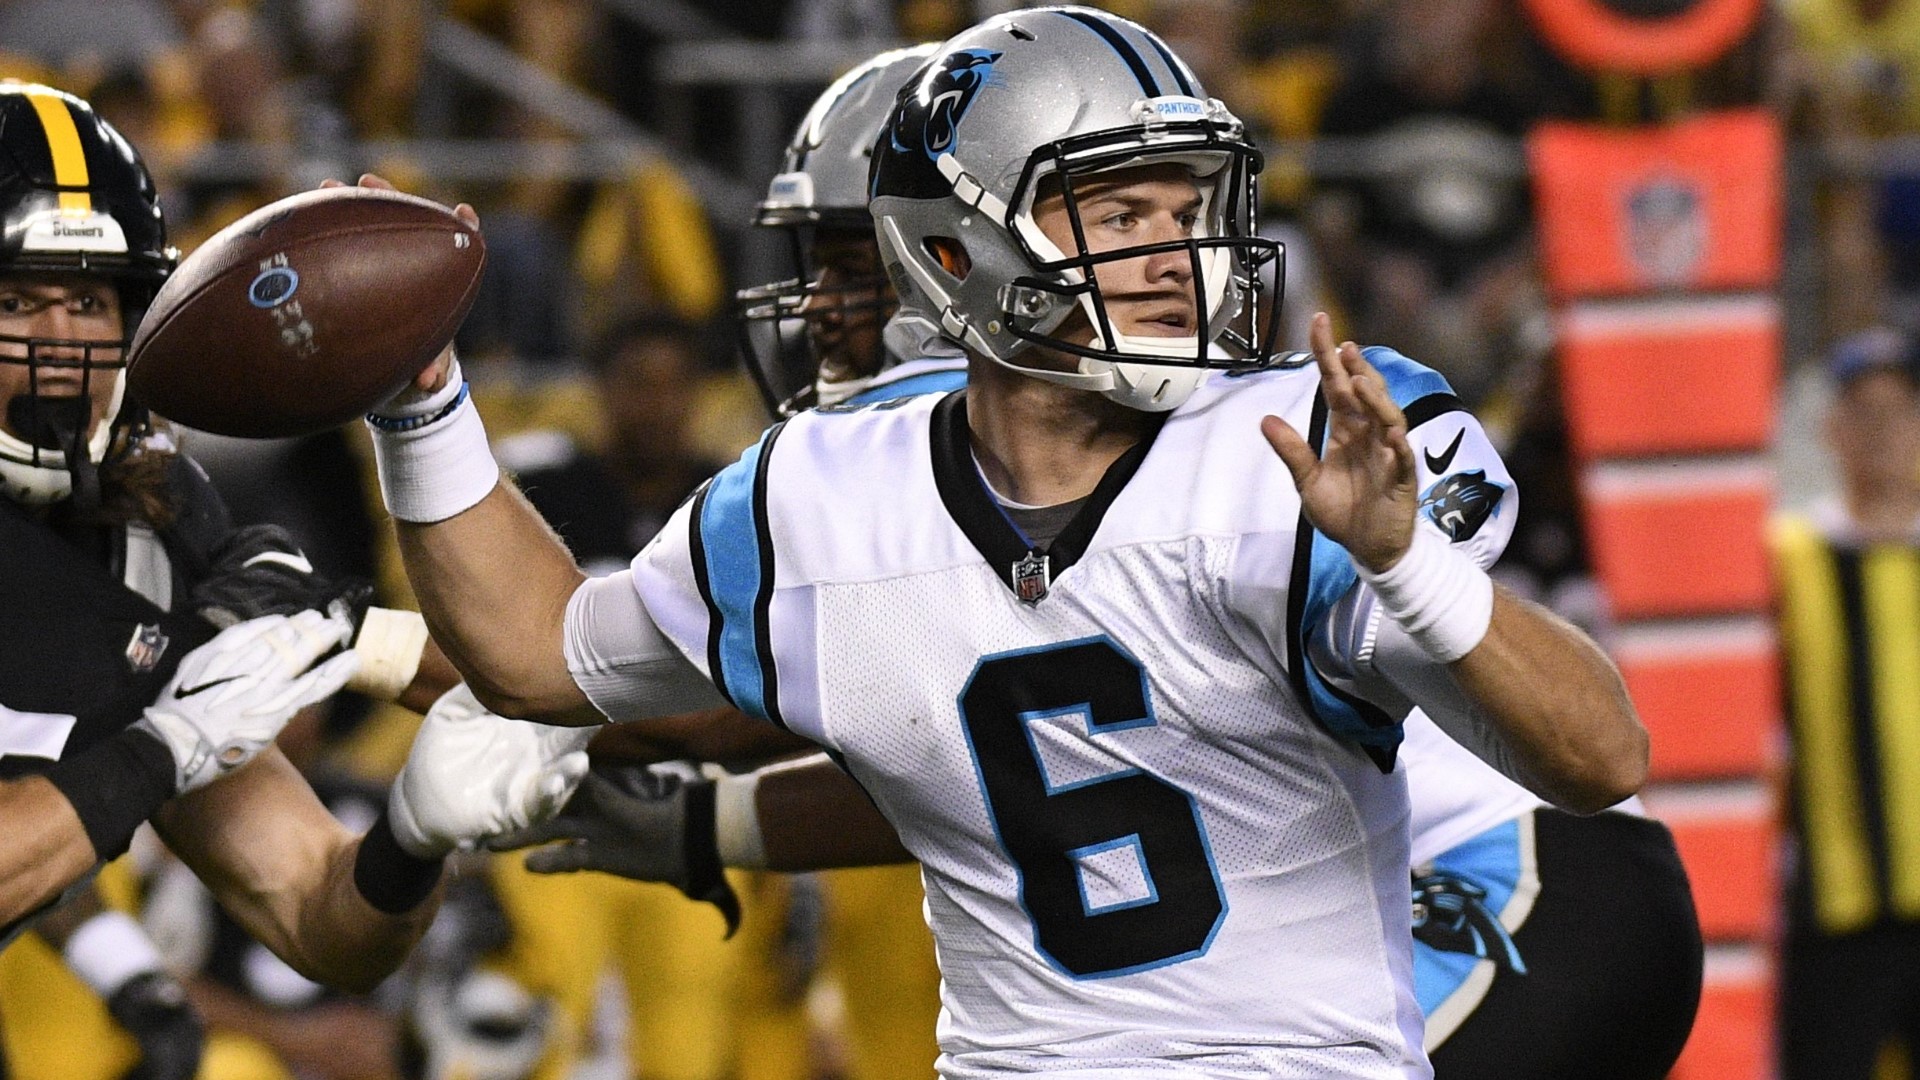 Taylor Heinicke was moved up from the practice squad to Washington and will back up Dwayne Haskins at quarterback.